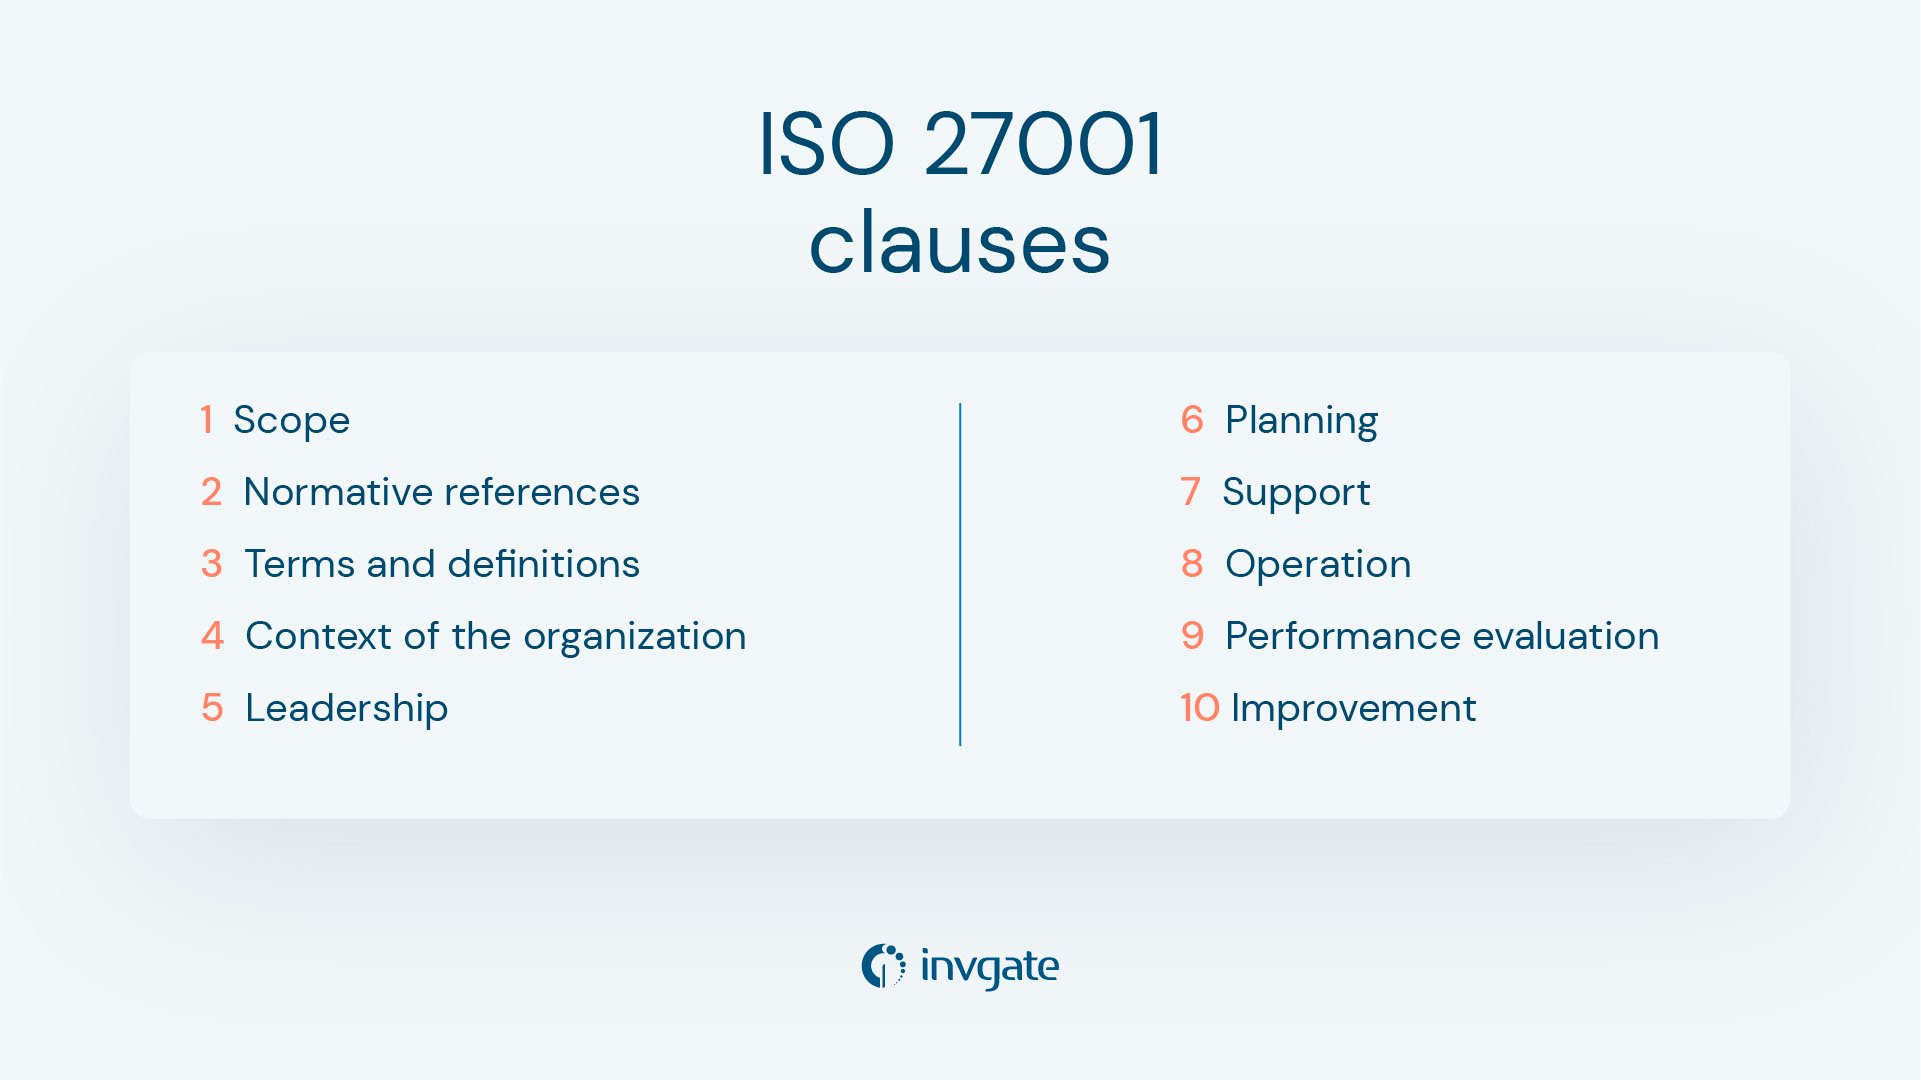 The ISO 27001 standard is organized in 10 clauses.